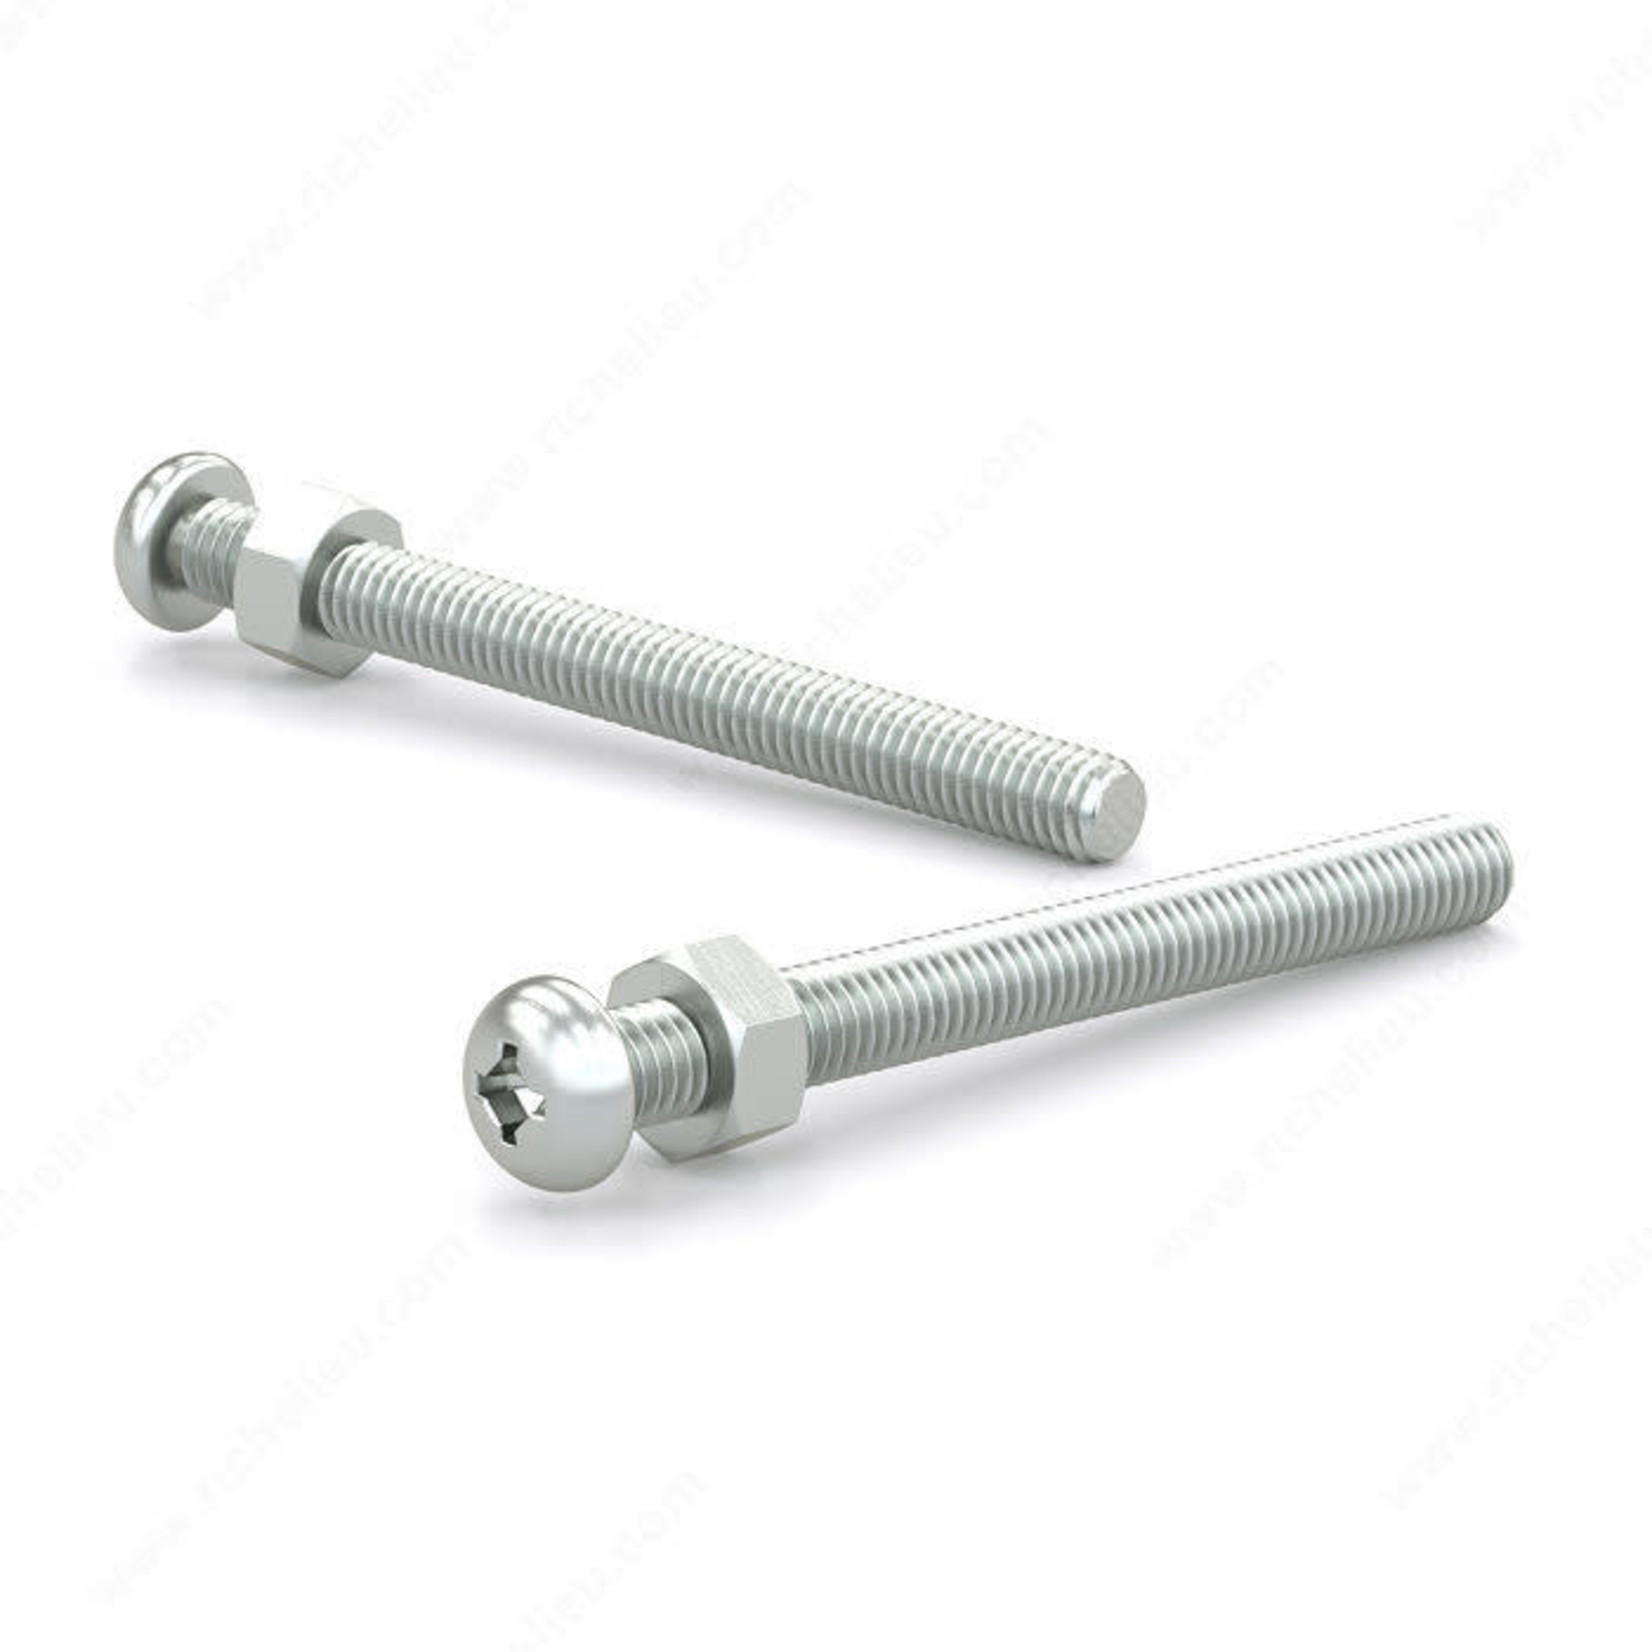 RELIABLE MACHINE SCREW WITH NUT, PAN HEAD, 1/4" 3/4IN, 8PK BLISTER